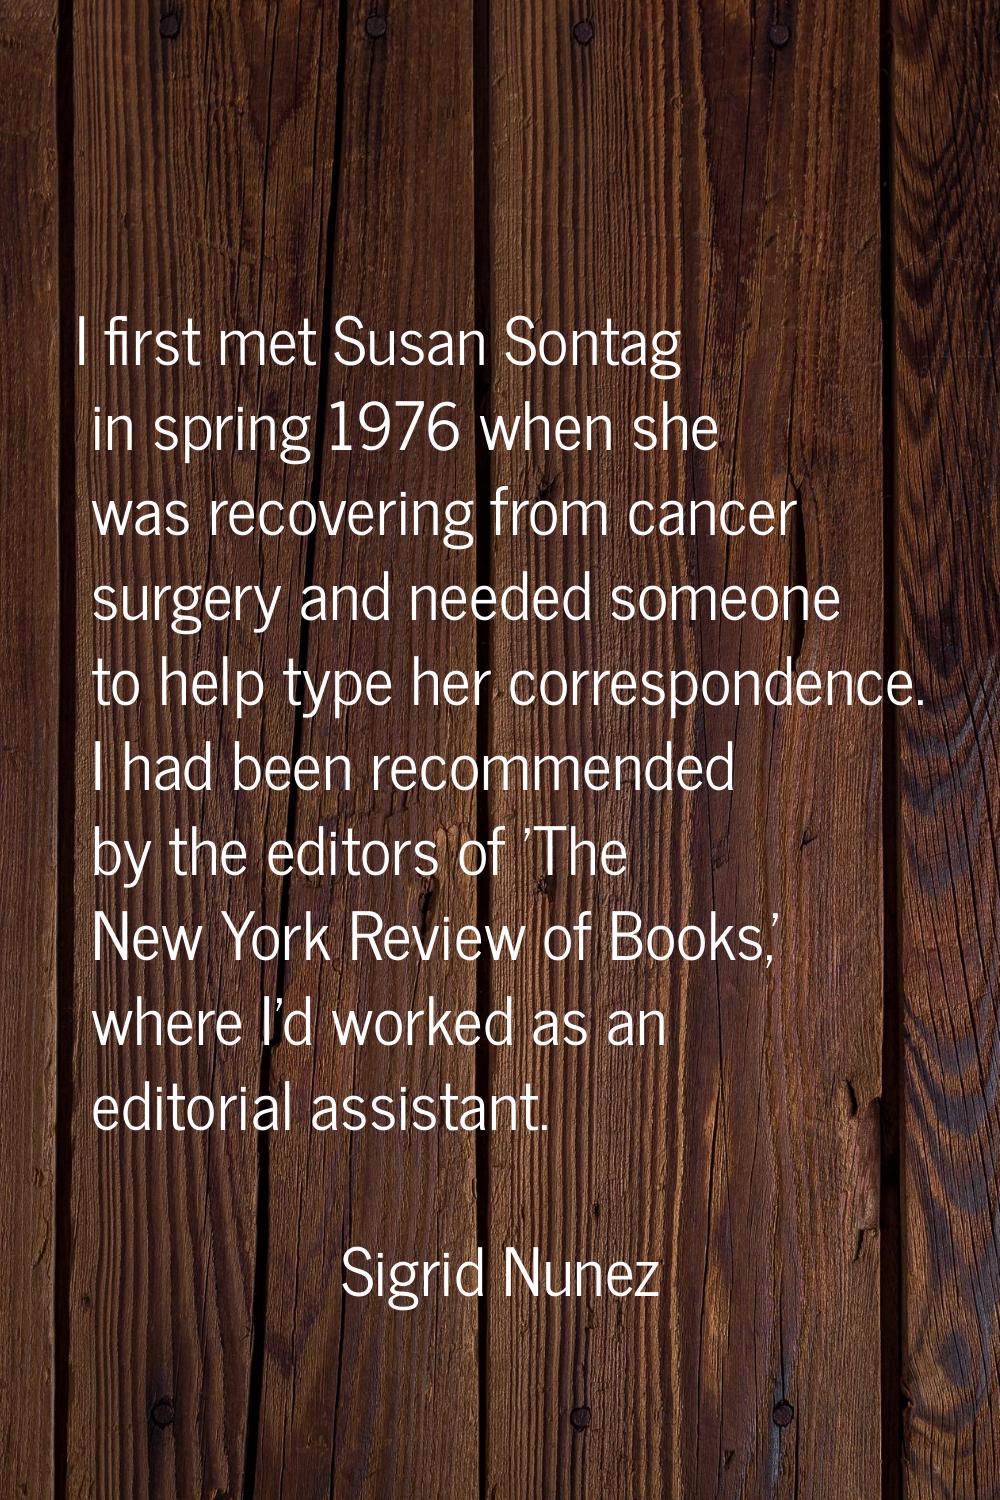 I first met Susan Sontag in spring 1976 when she was recovering from cancer surgery and needed some